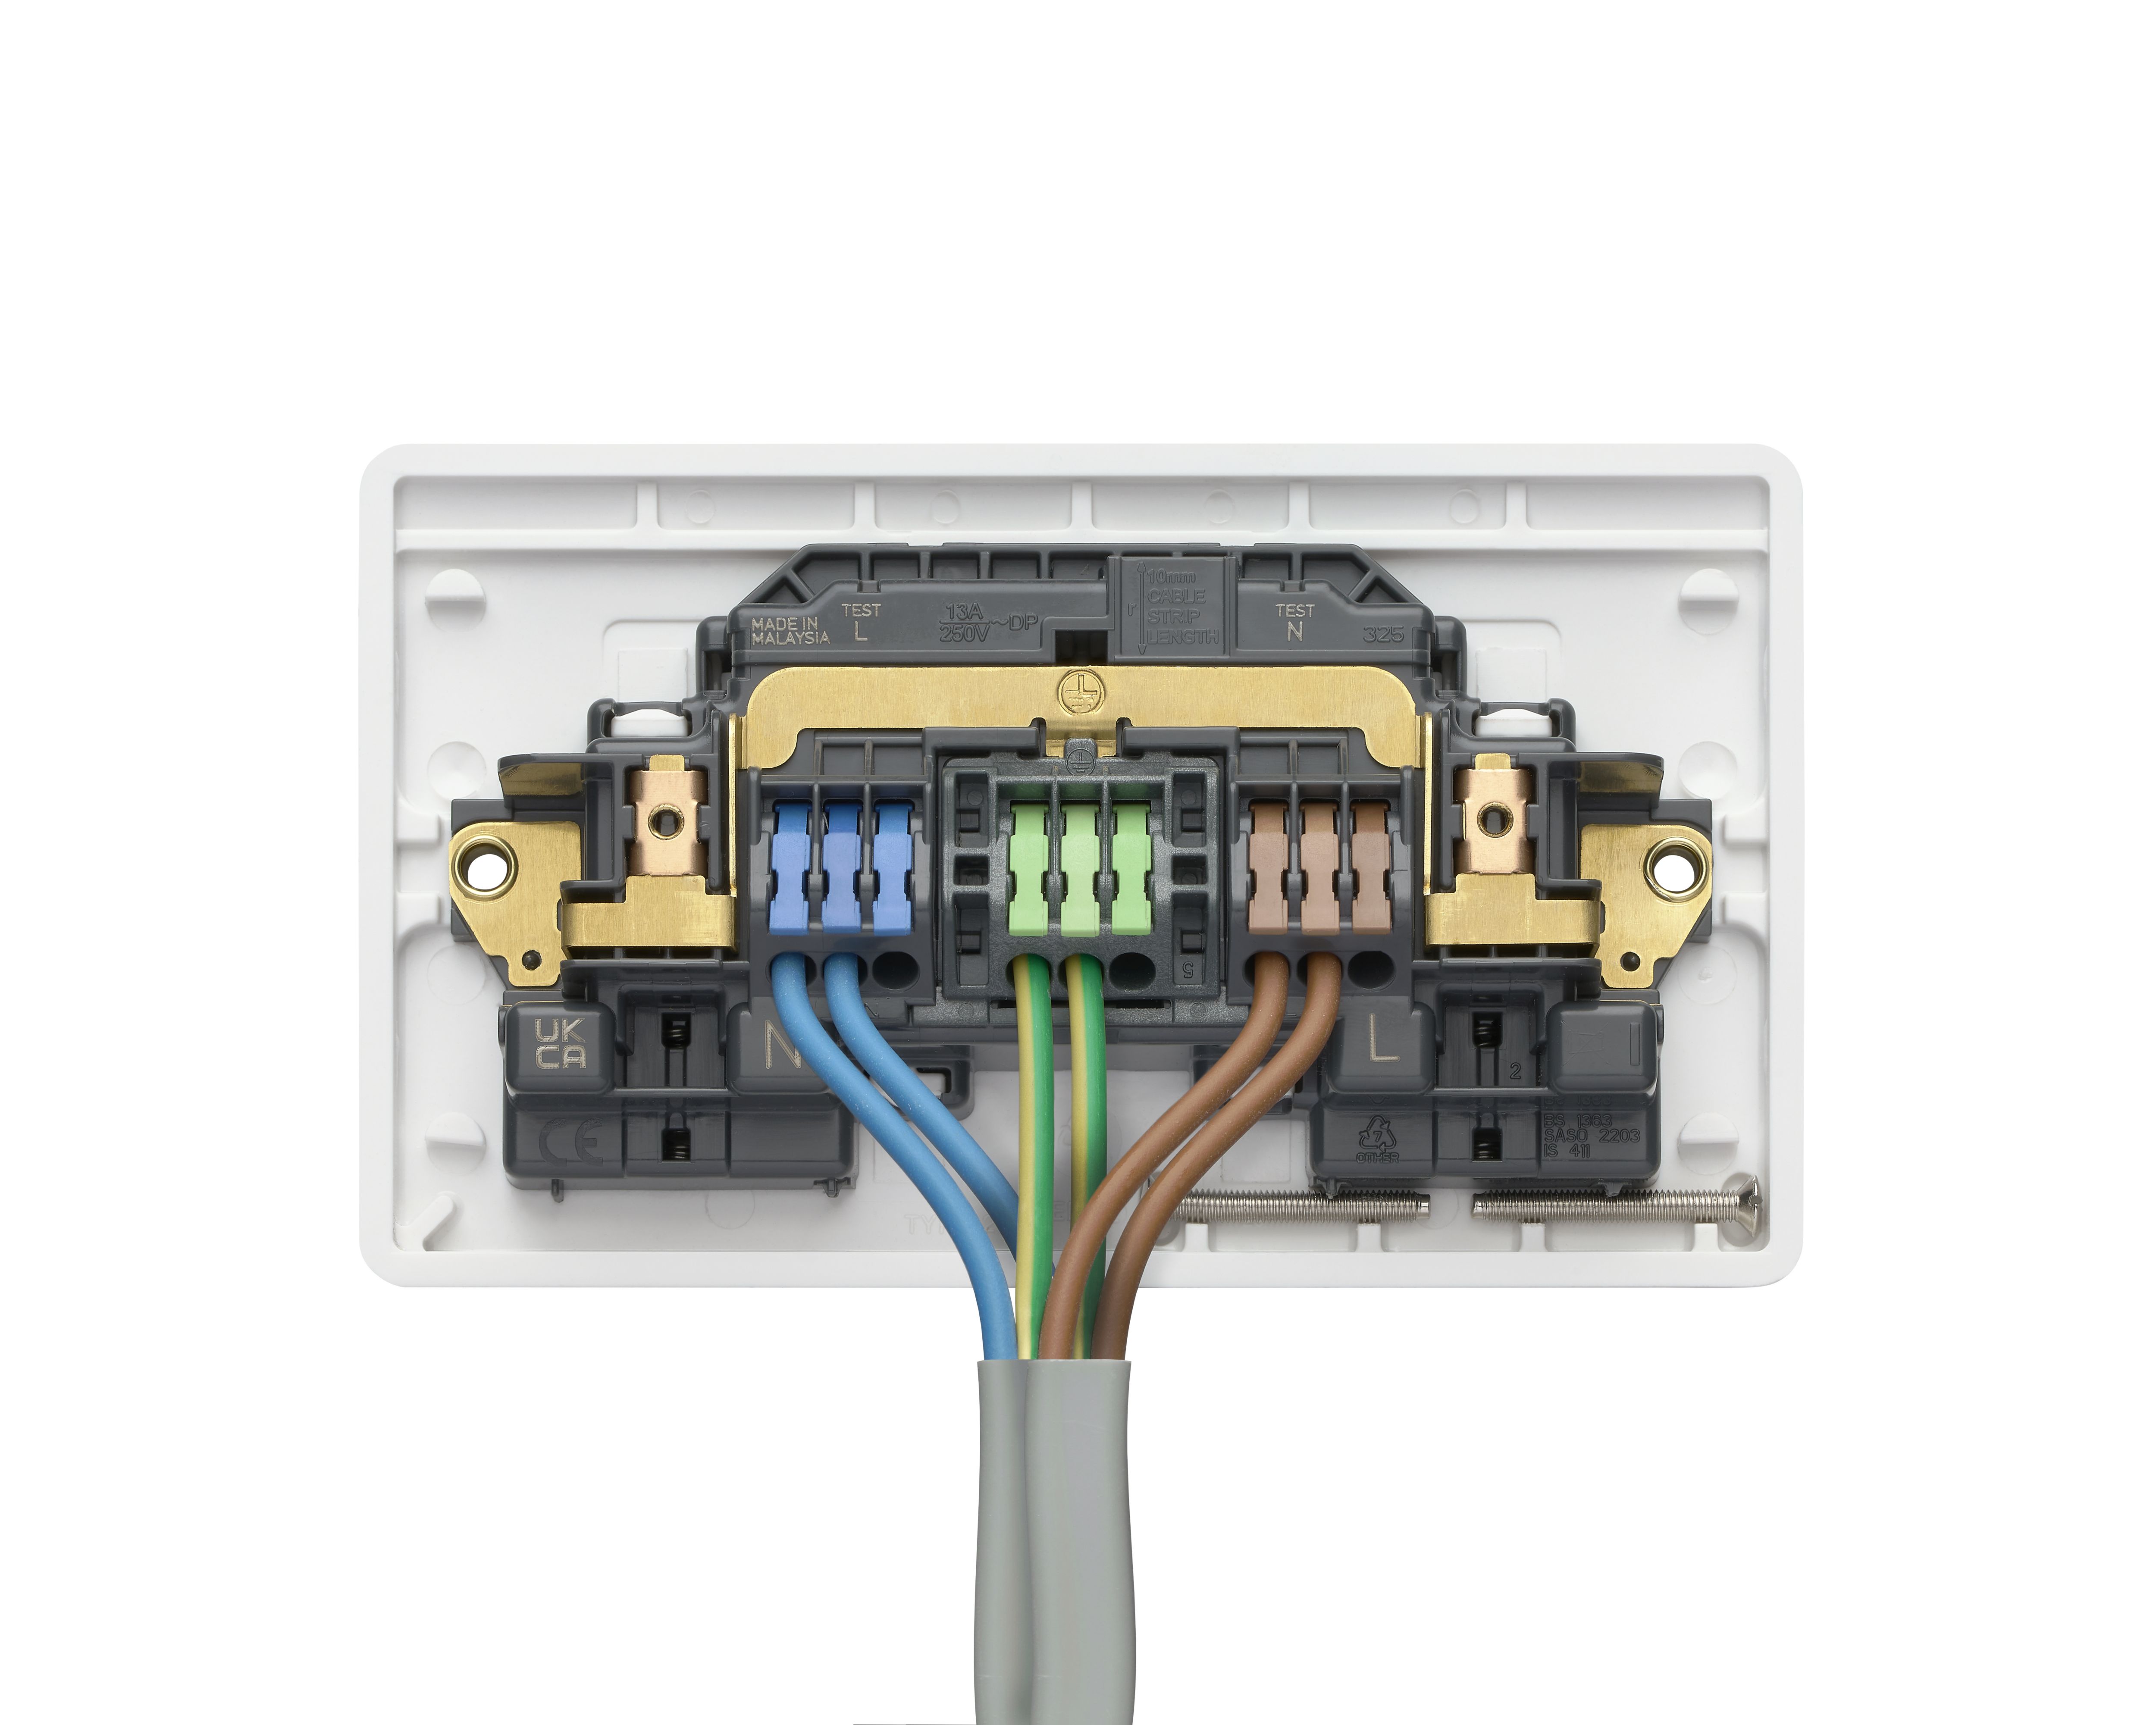 MK White Double 13A Switched Rapid fix socket